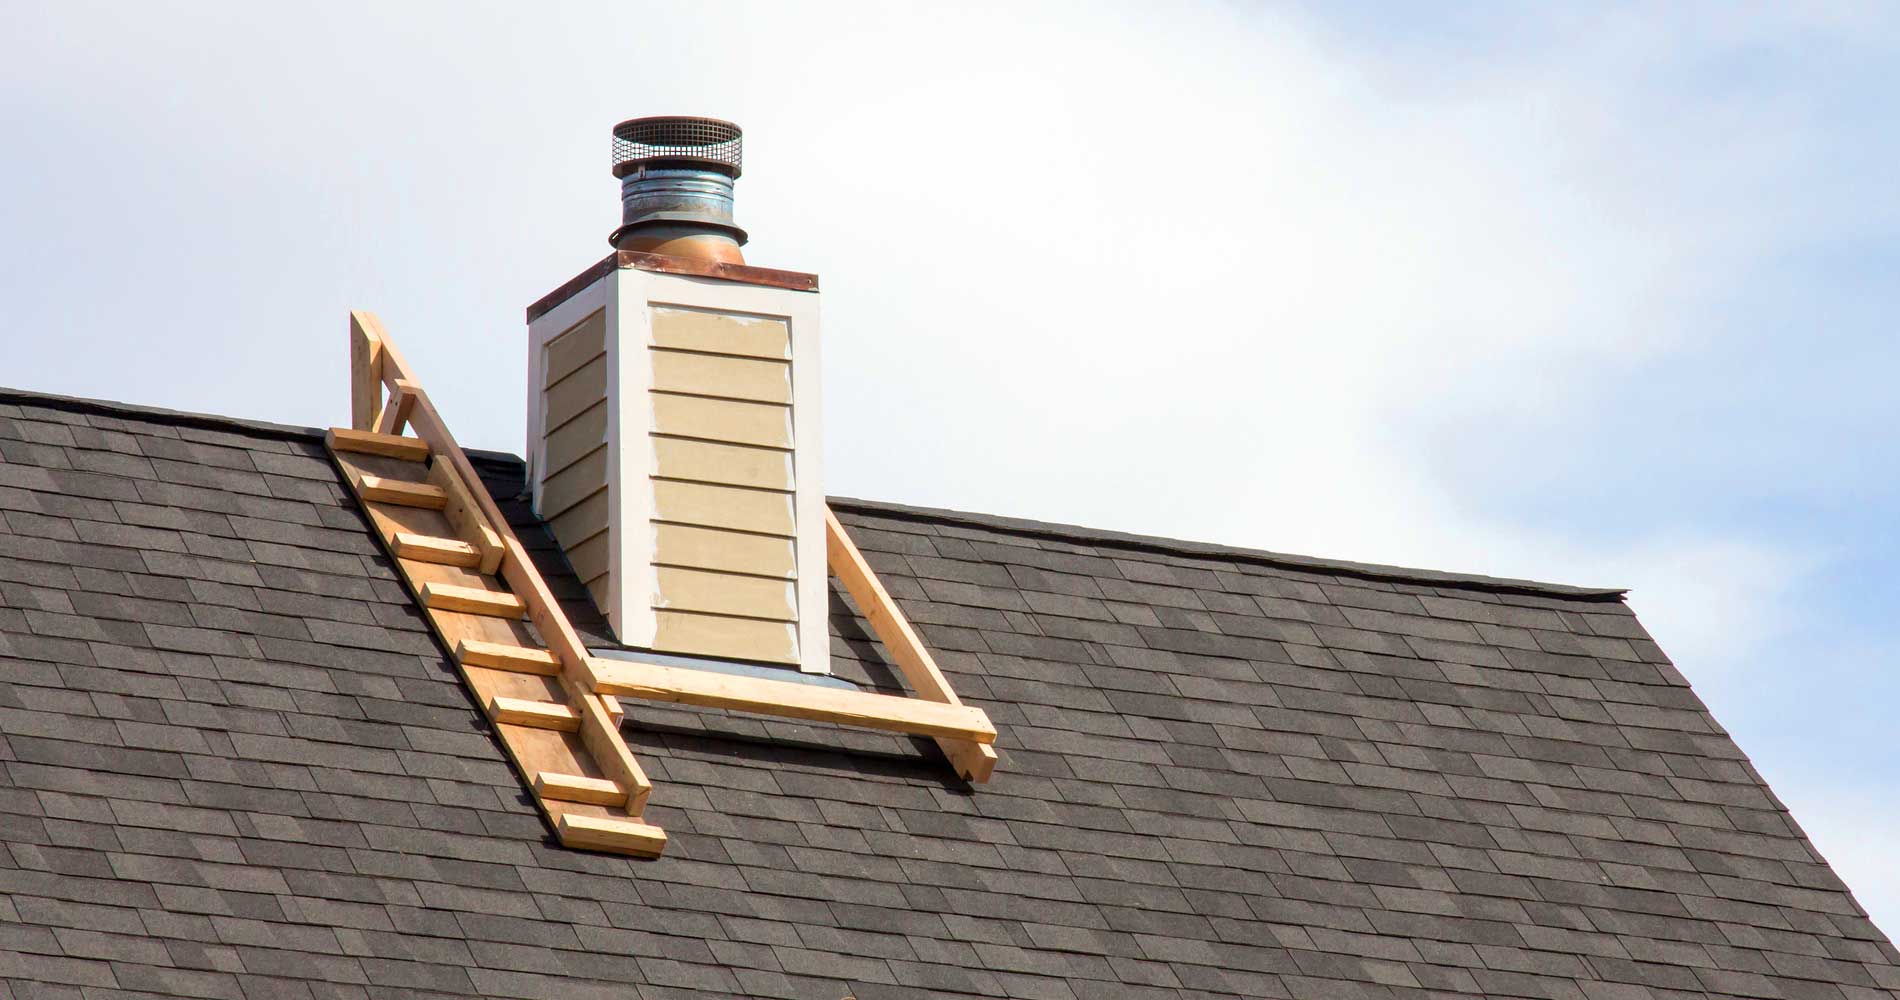 Chimney Repair & Replacement in Chester, NJ 07930